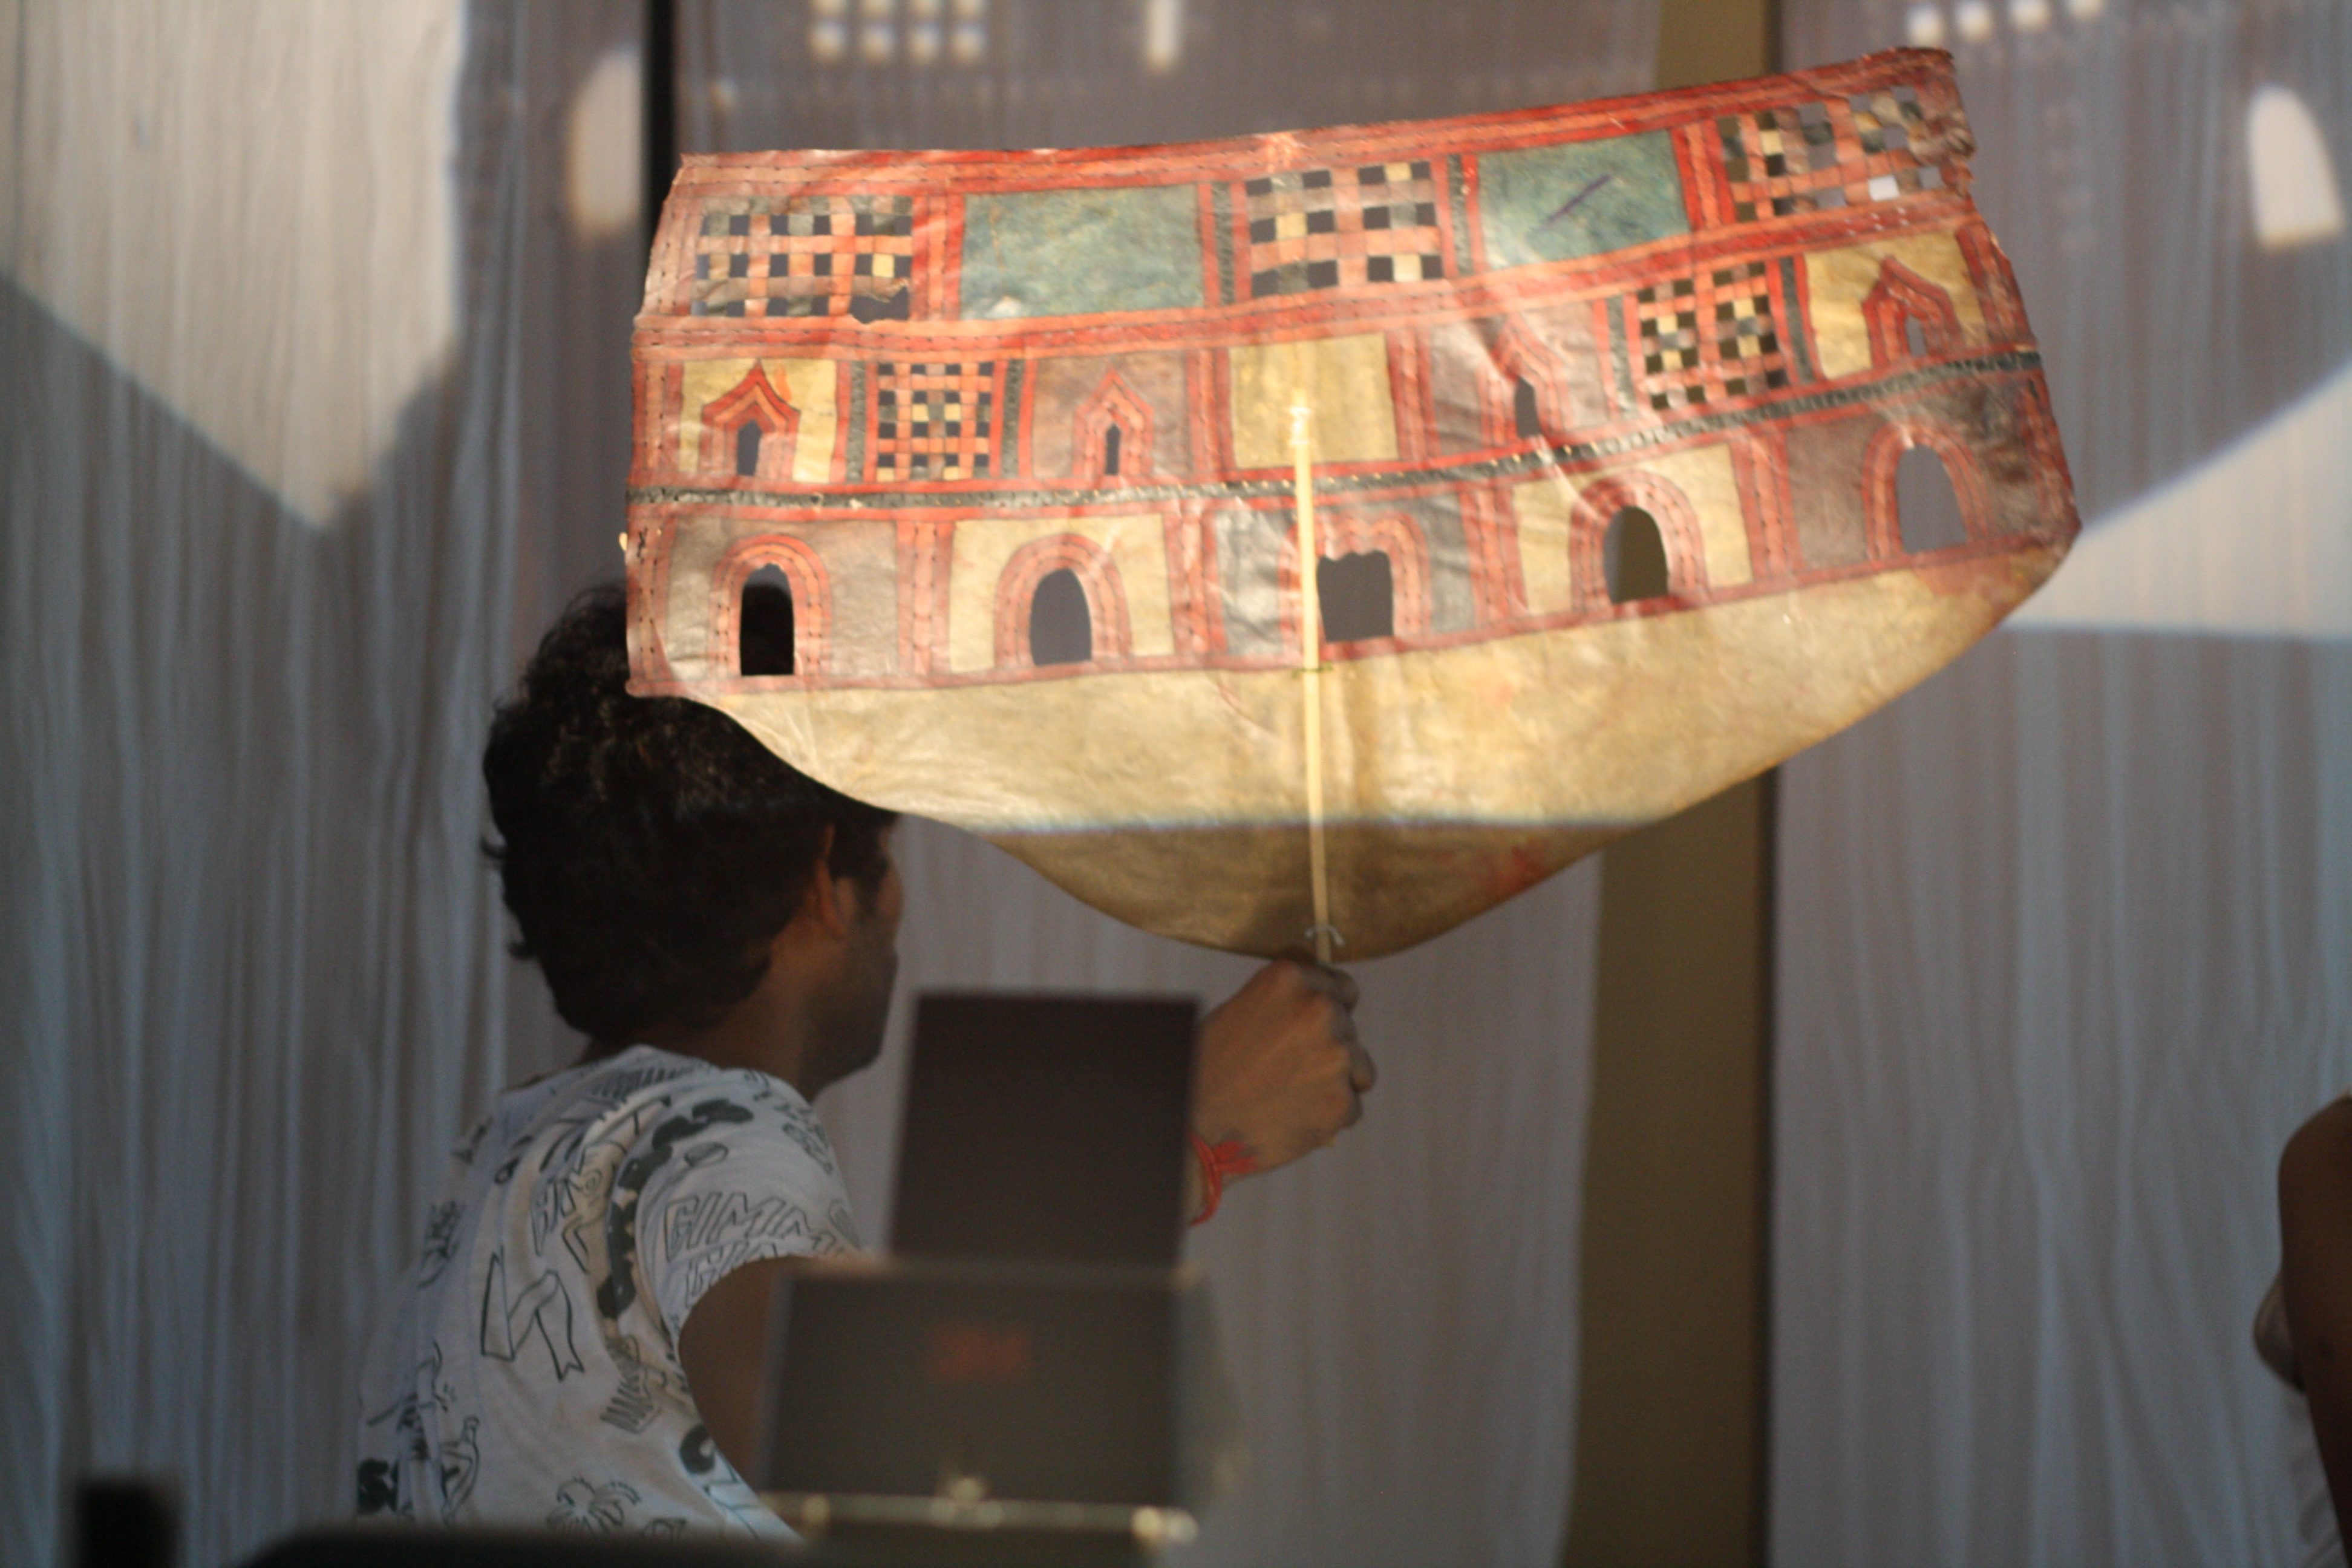 Shameem operating a leather shadow puppet in rehearsal. The puppet depicts the palace of the Pandavas: Indraprastha.